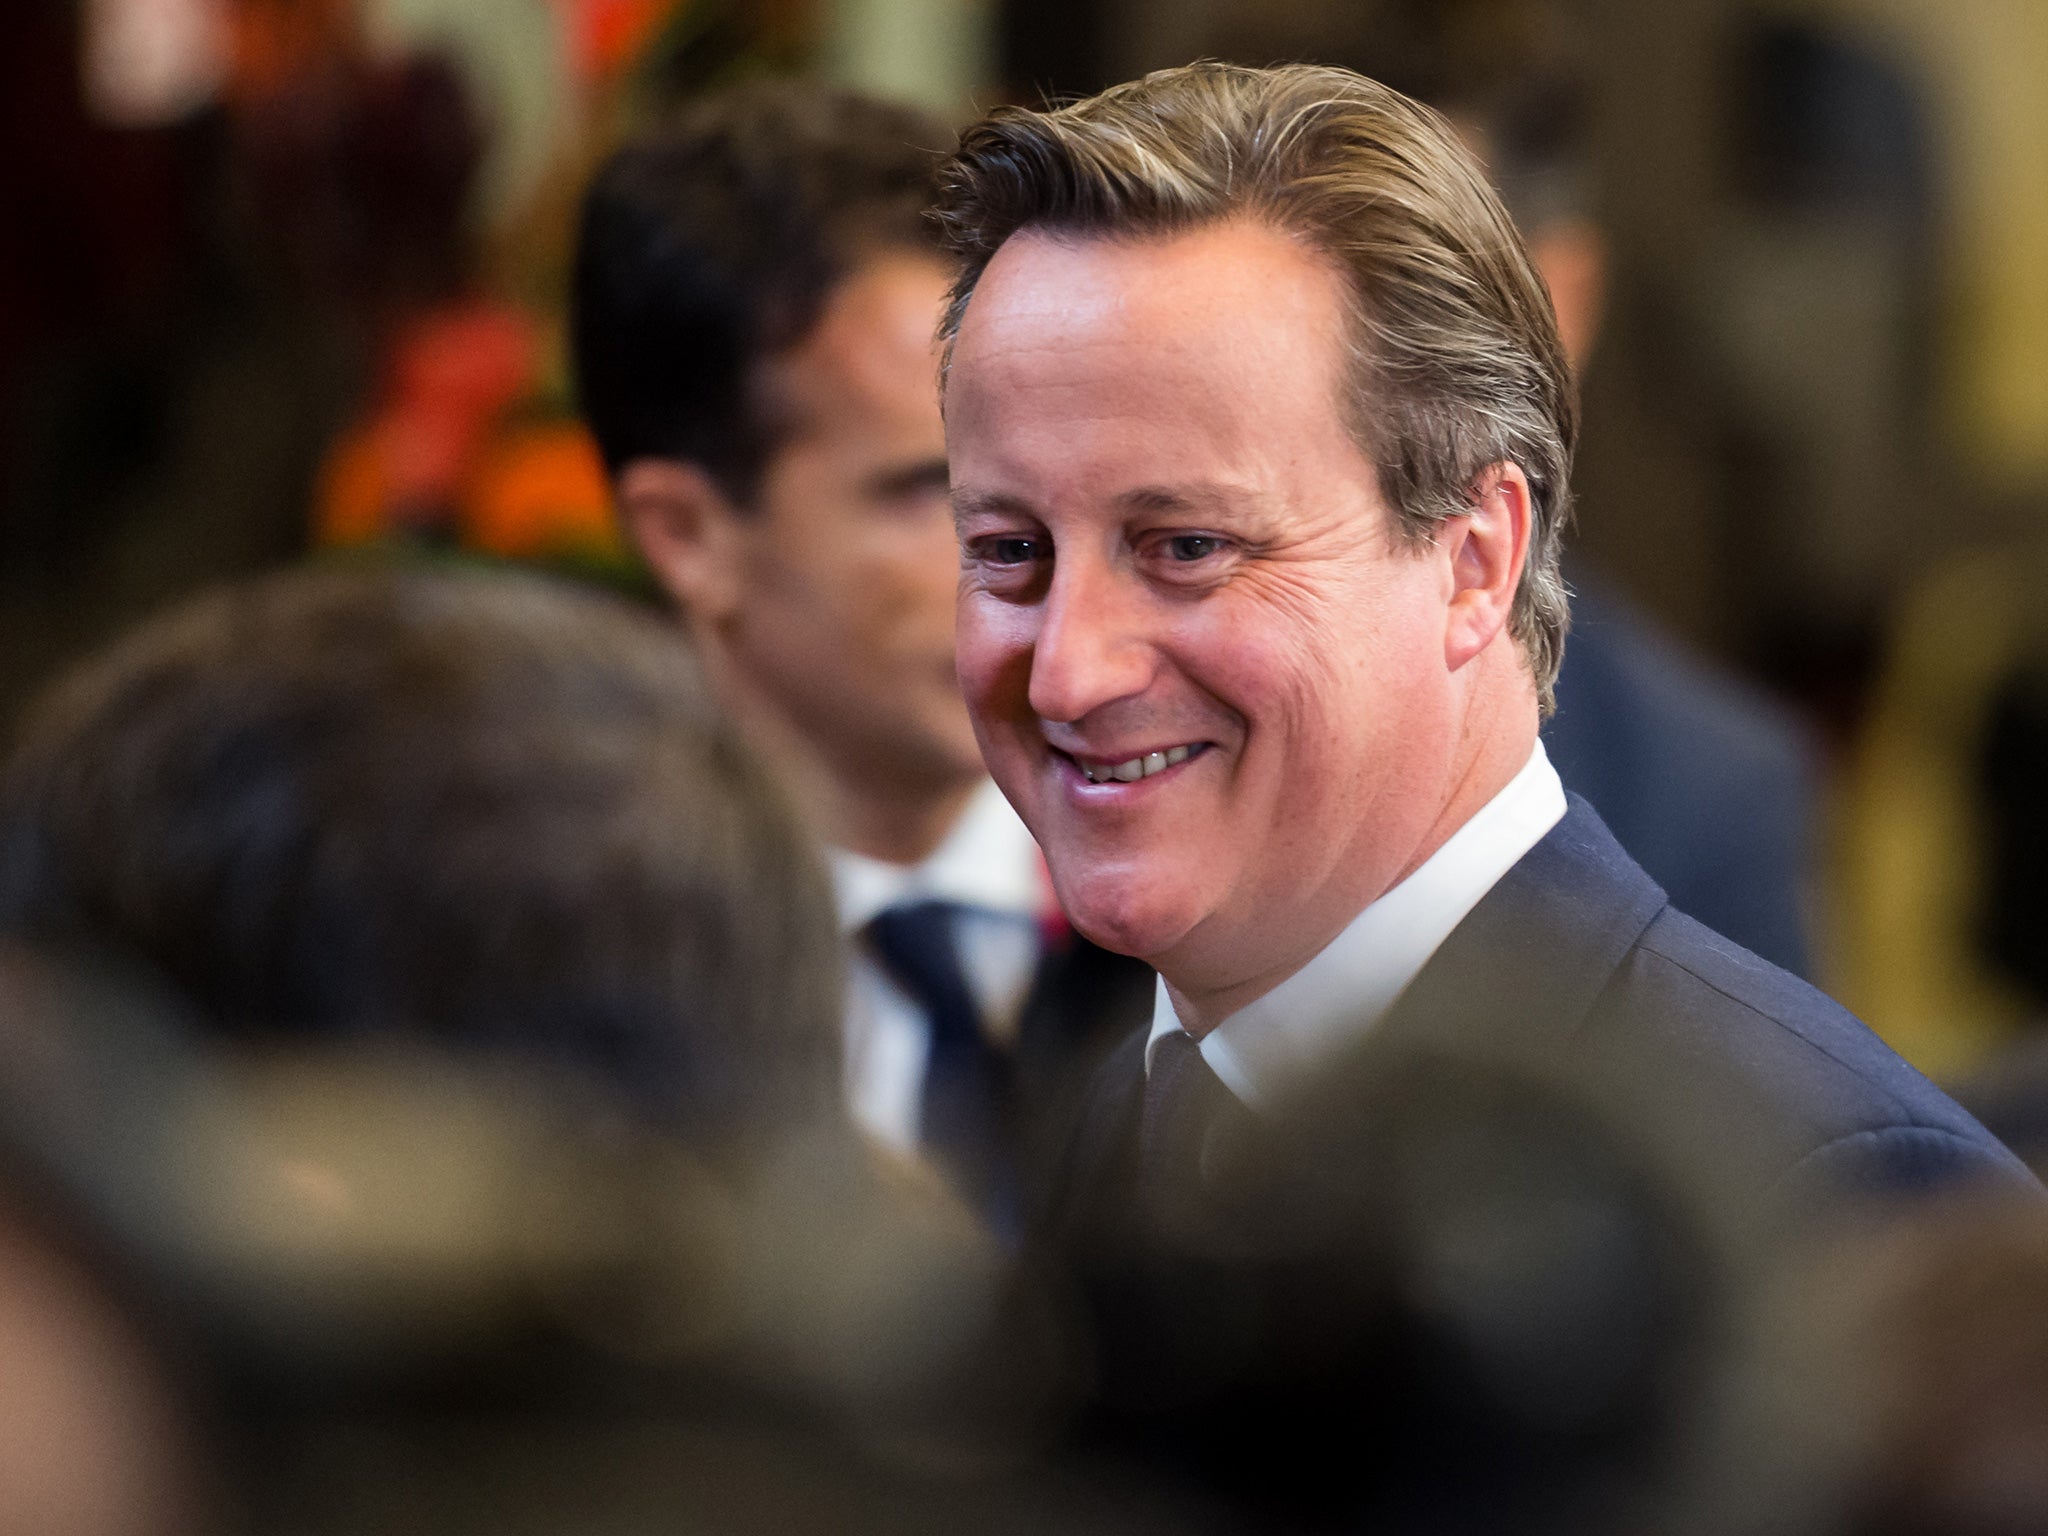 David Cameron has previously pledged that the Conservative government will committ to green issues